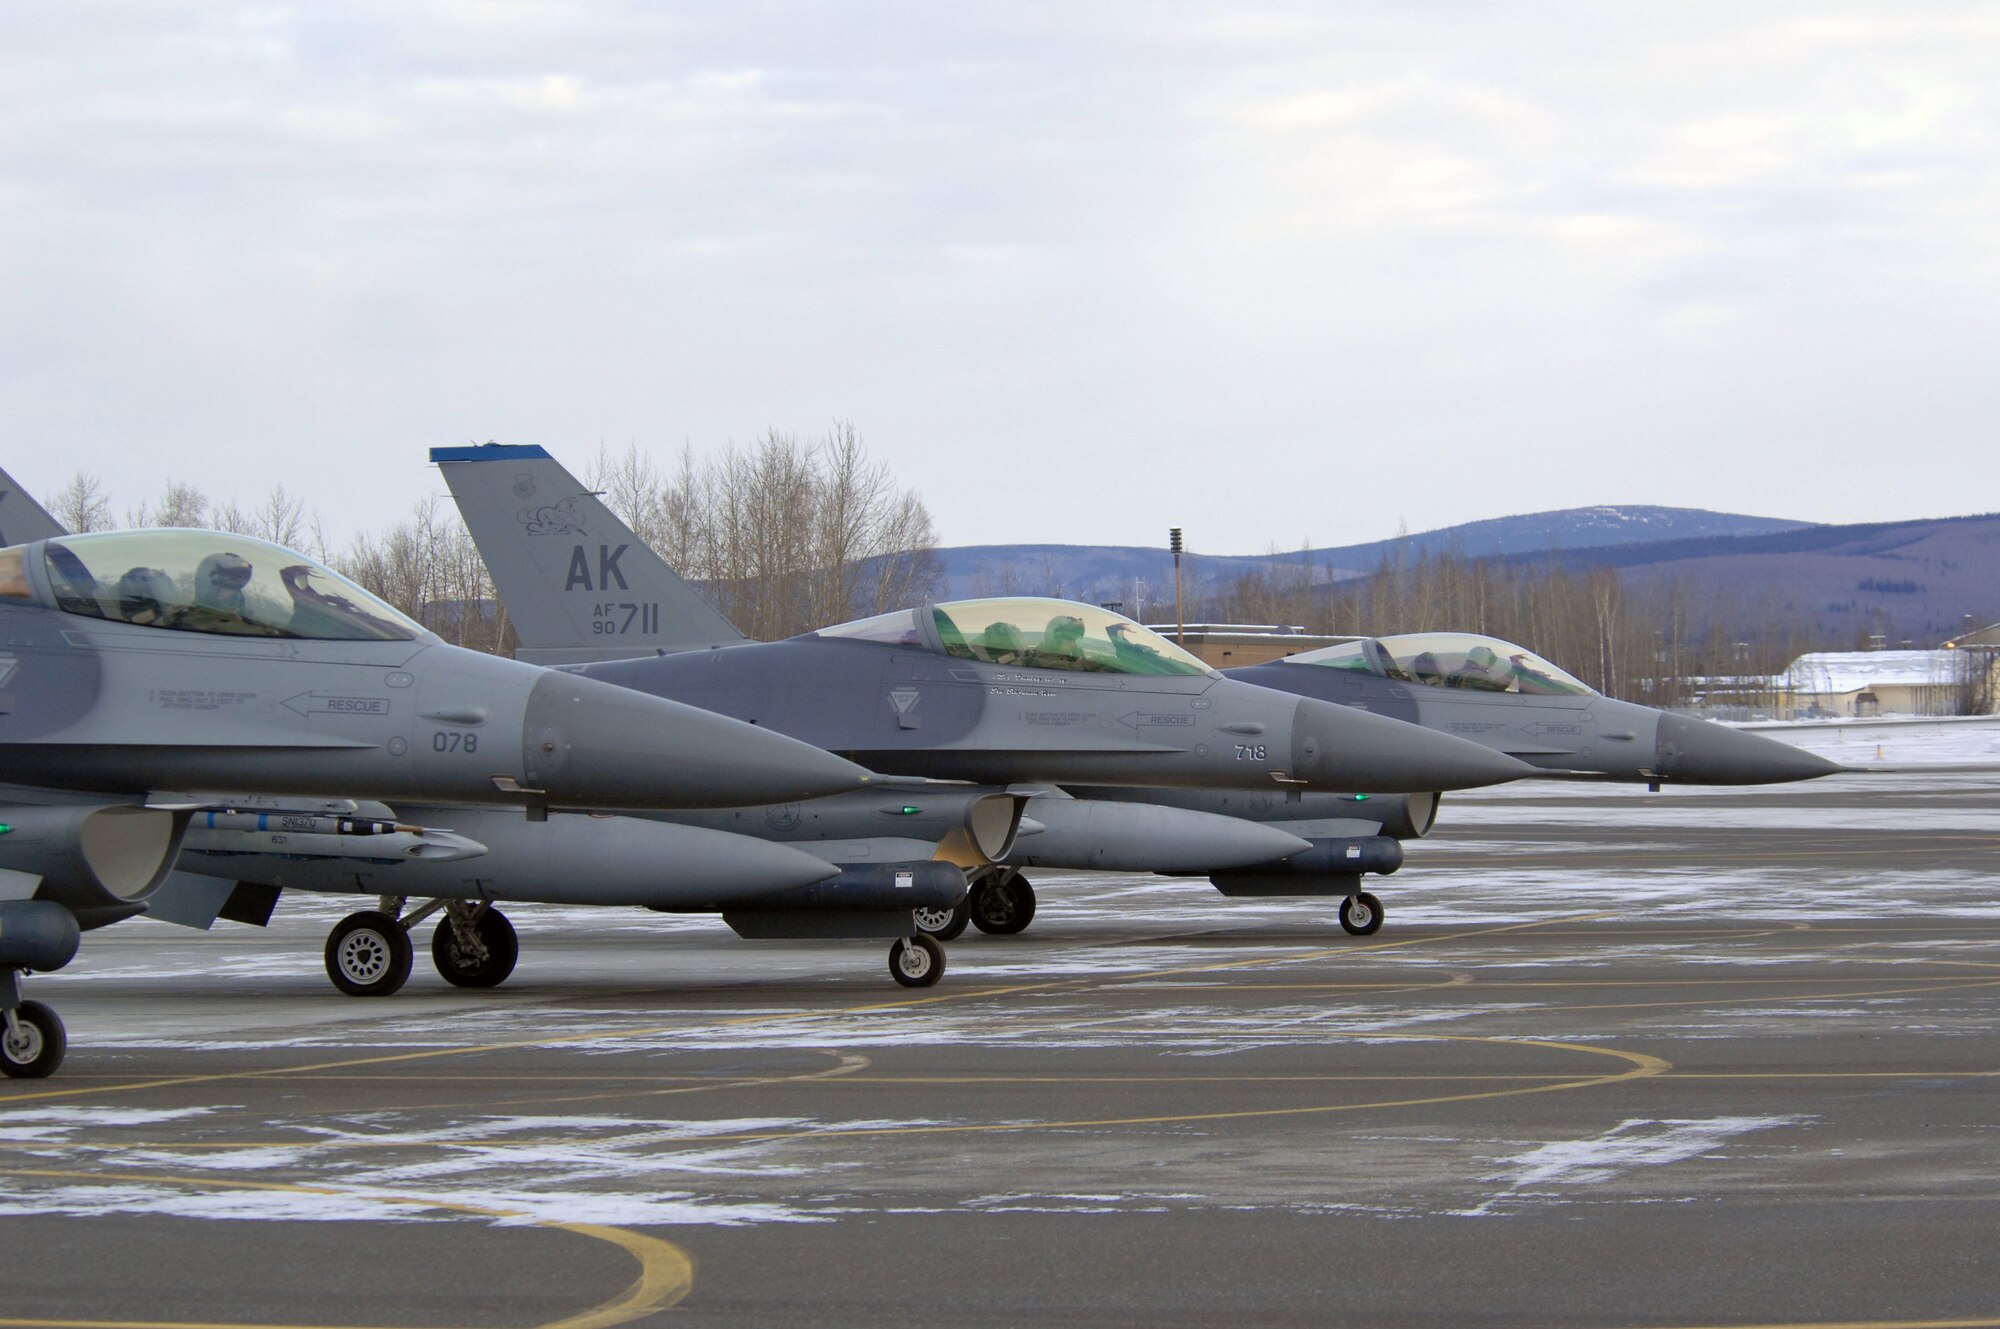 EIELSON AIR FORCE BASE, Alaska -- F-16 Fighting Falcon aircraft from the 18th Fighter Squadron sit on the flightline here prior to taking off for a training mission on Feb.8. The 18th Fighter Squadron conducts air operations for combat-ready F-16 aircraft and provides close air support, forward air control (airborne), battlefield air interdiction, and offensive counter air.
(U.S. Air Force Photo by Staff Sgt Joshua Strang)